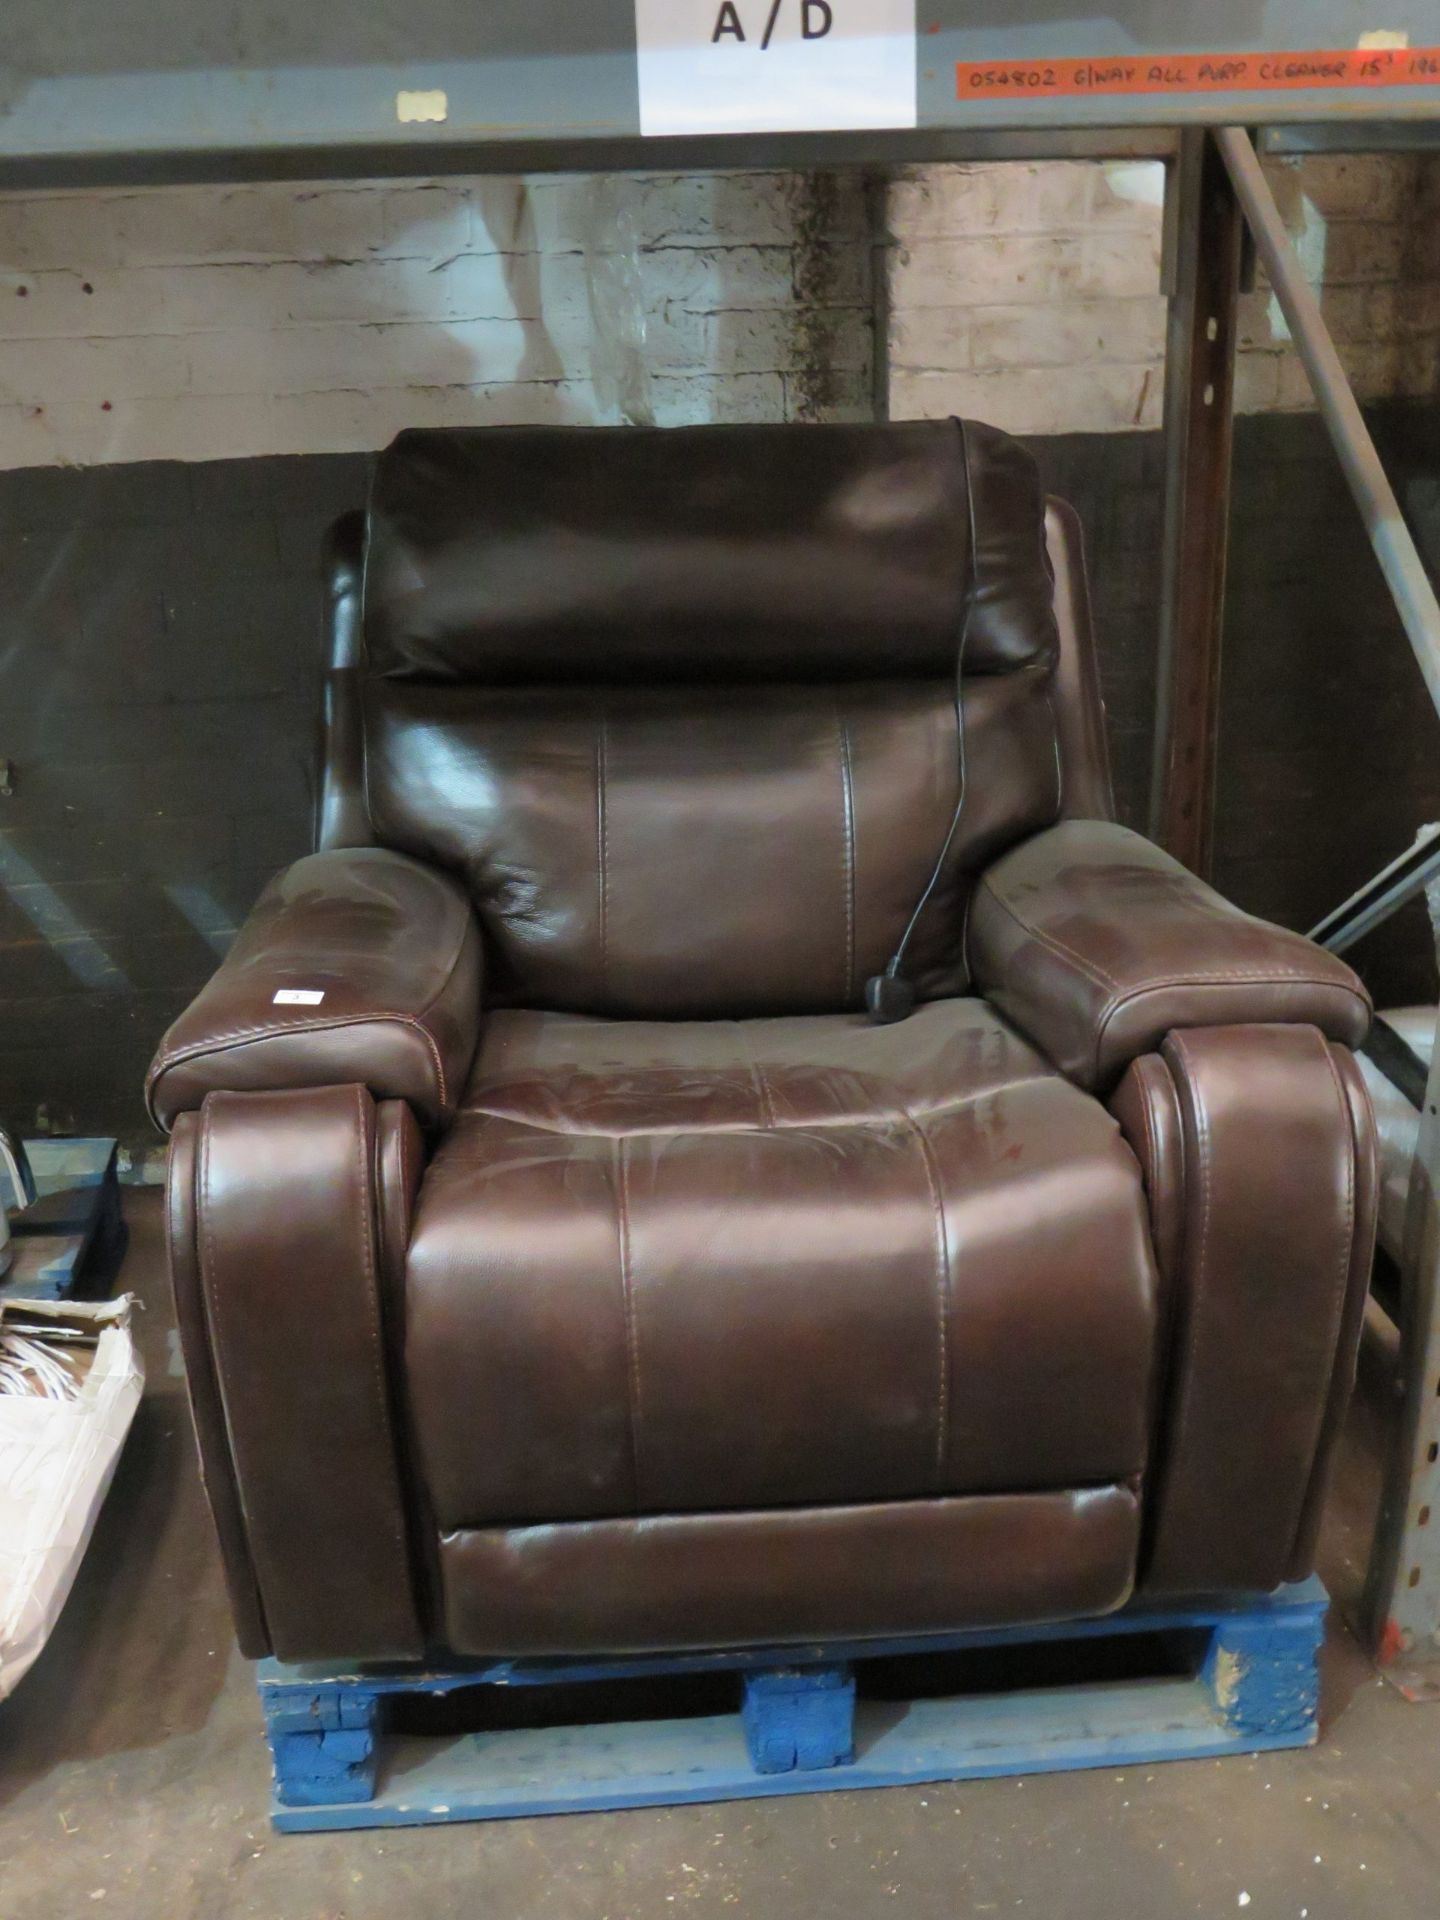 Costco electric leather recliner armchair, untested but overall appears to be in good condition